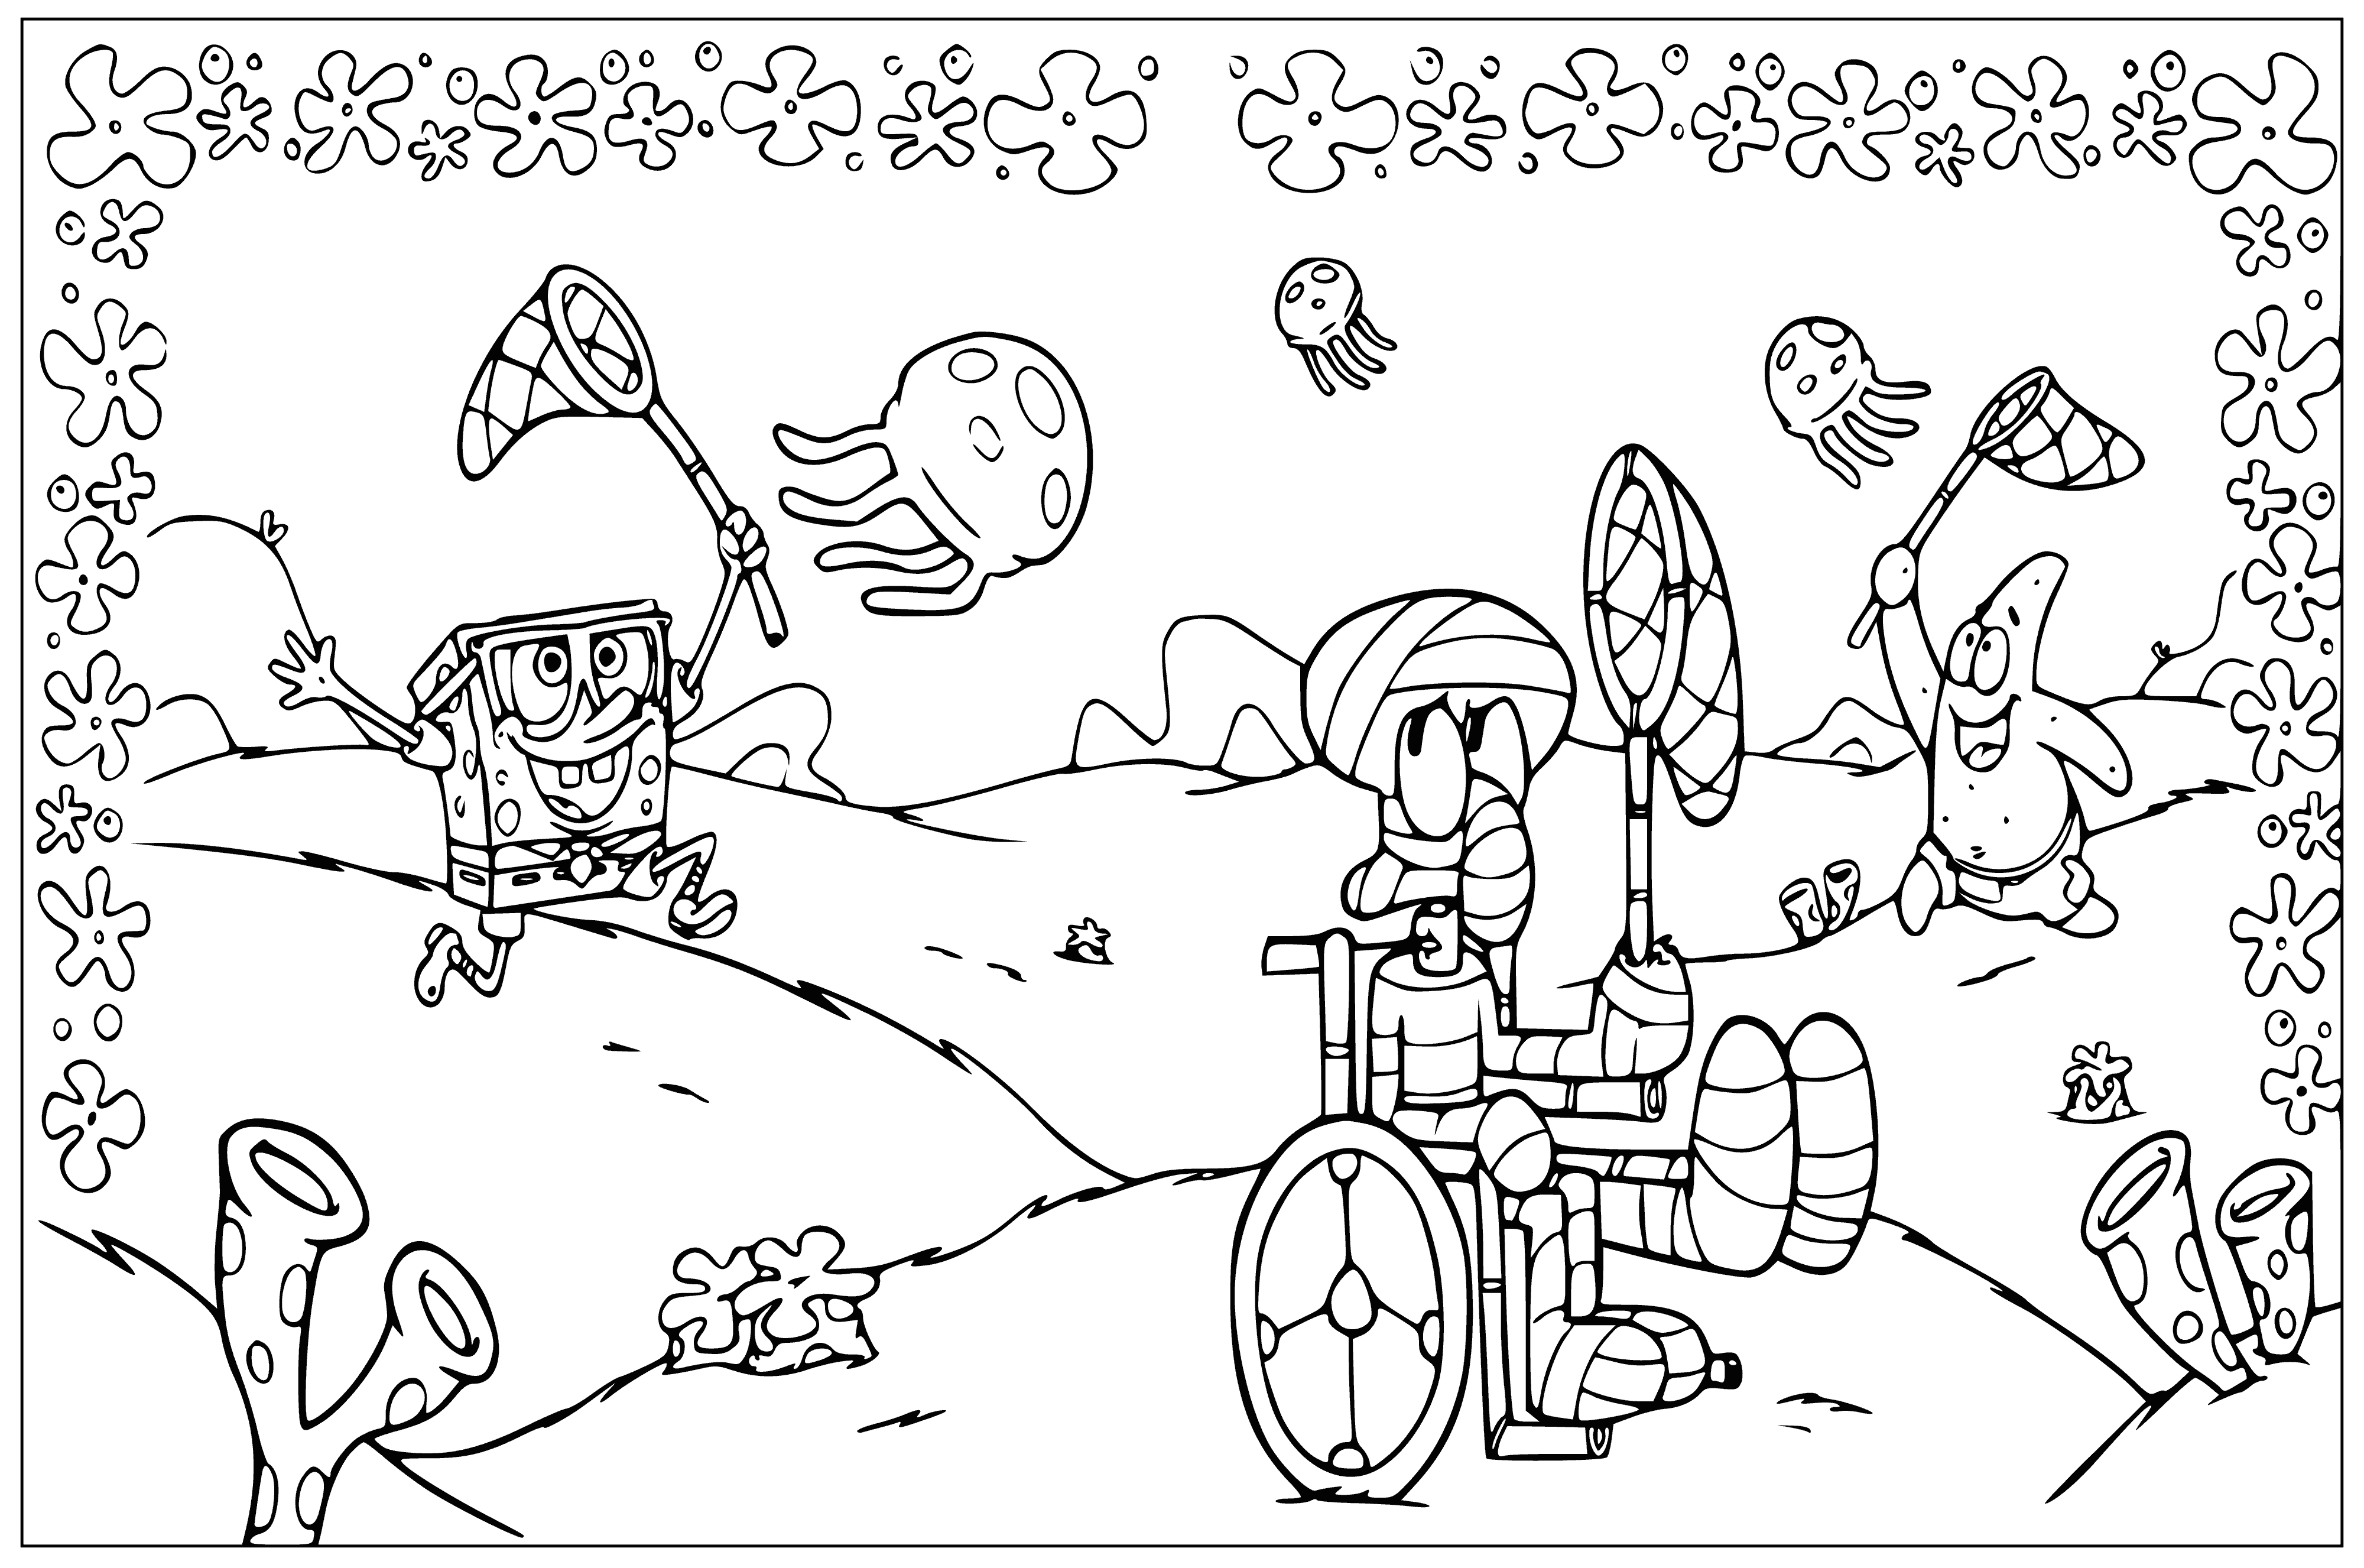 coloring page: Spongebob & Patrick net jellies. Squidward stands near sand castle. Trail of jellies to Sandy reading in jellyfish chair.